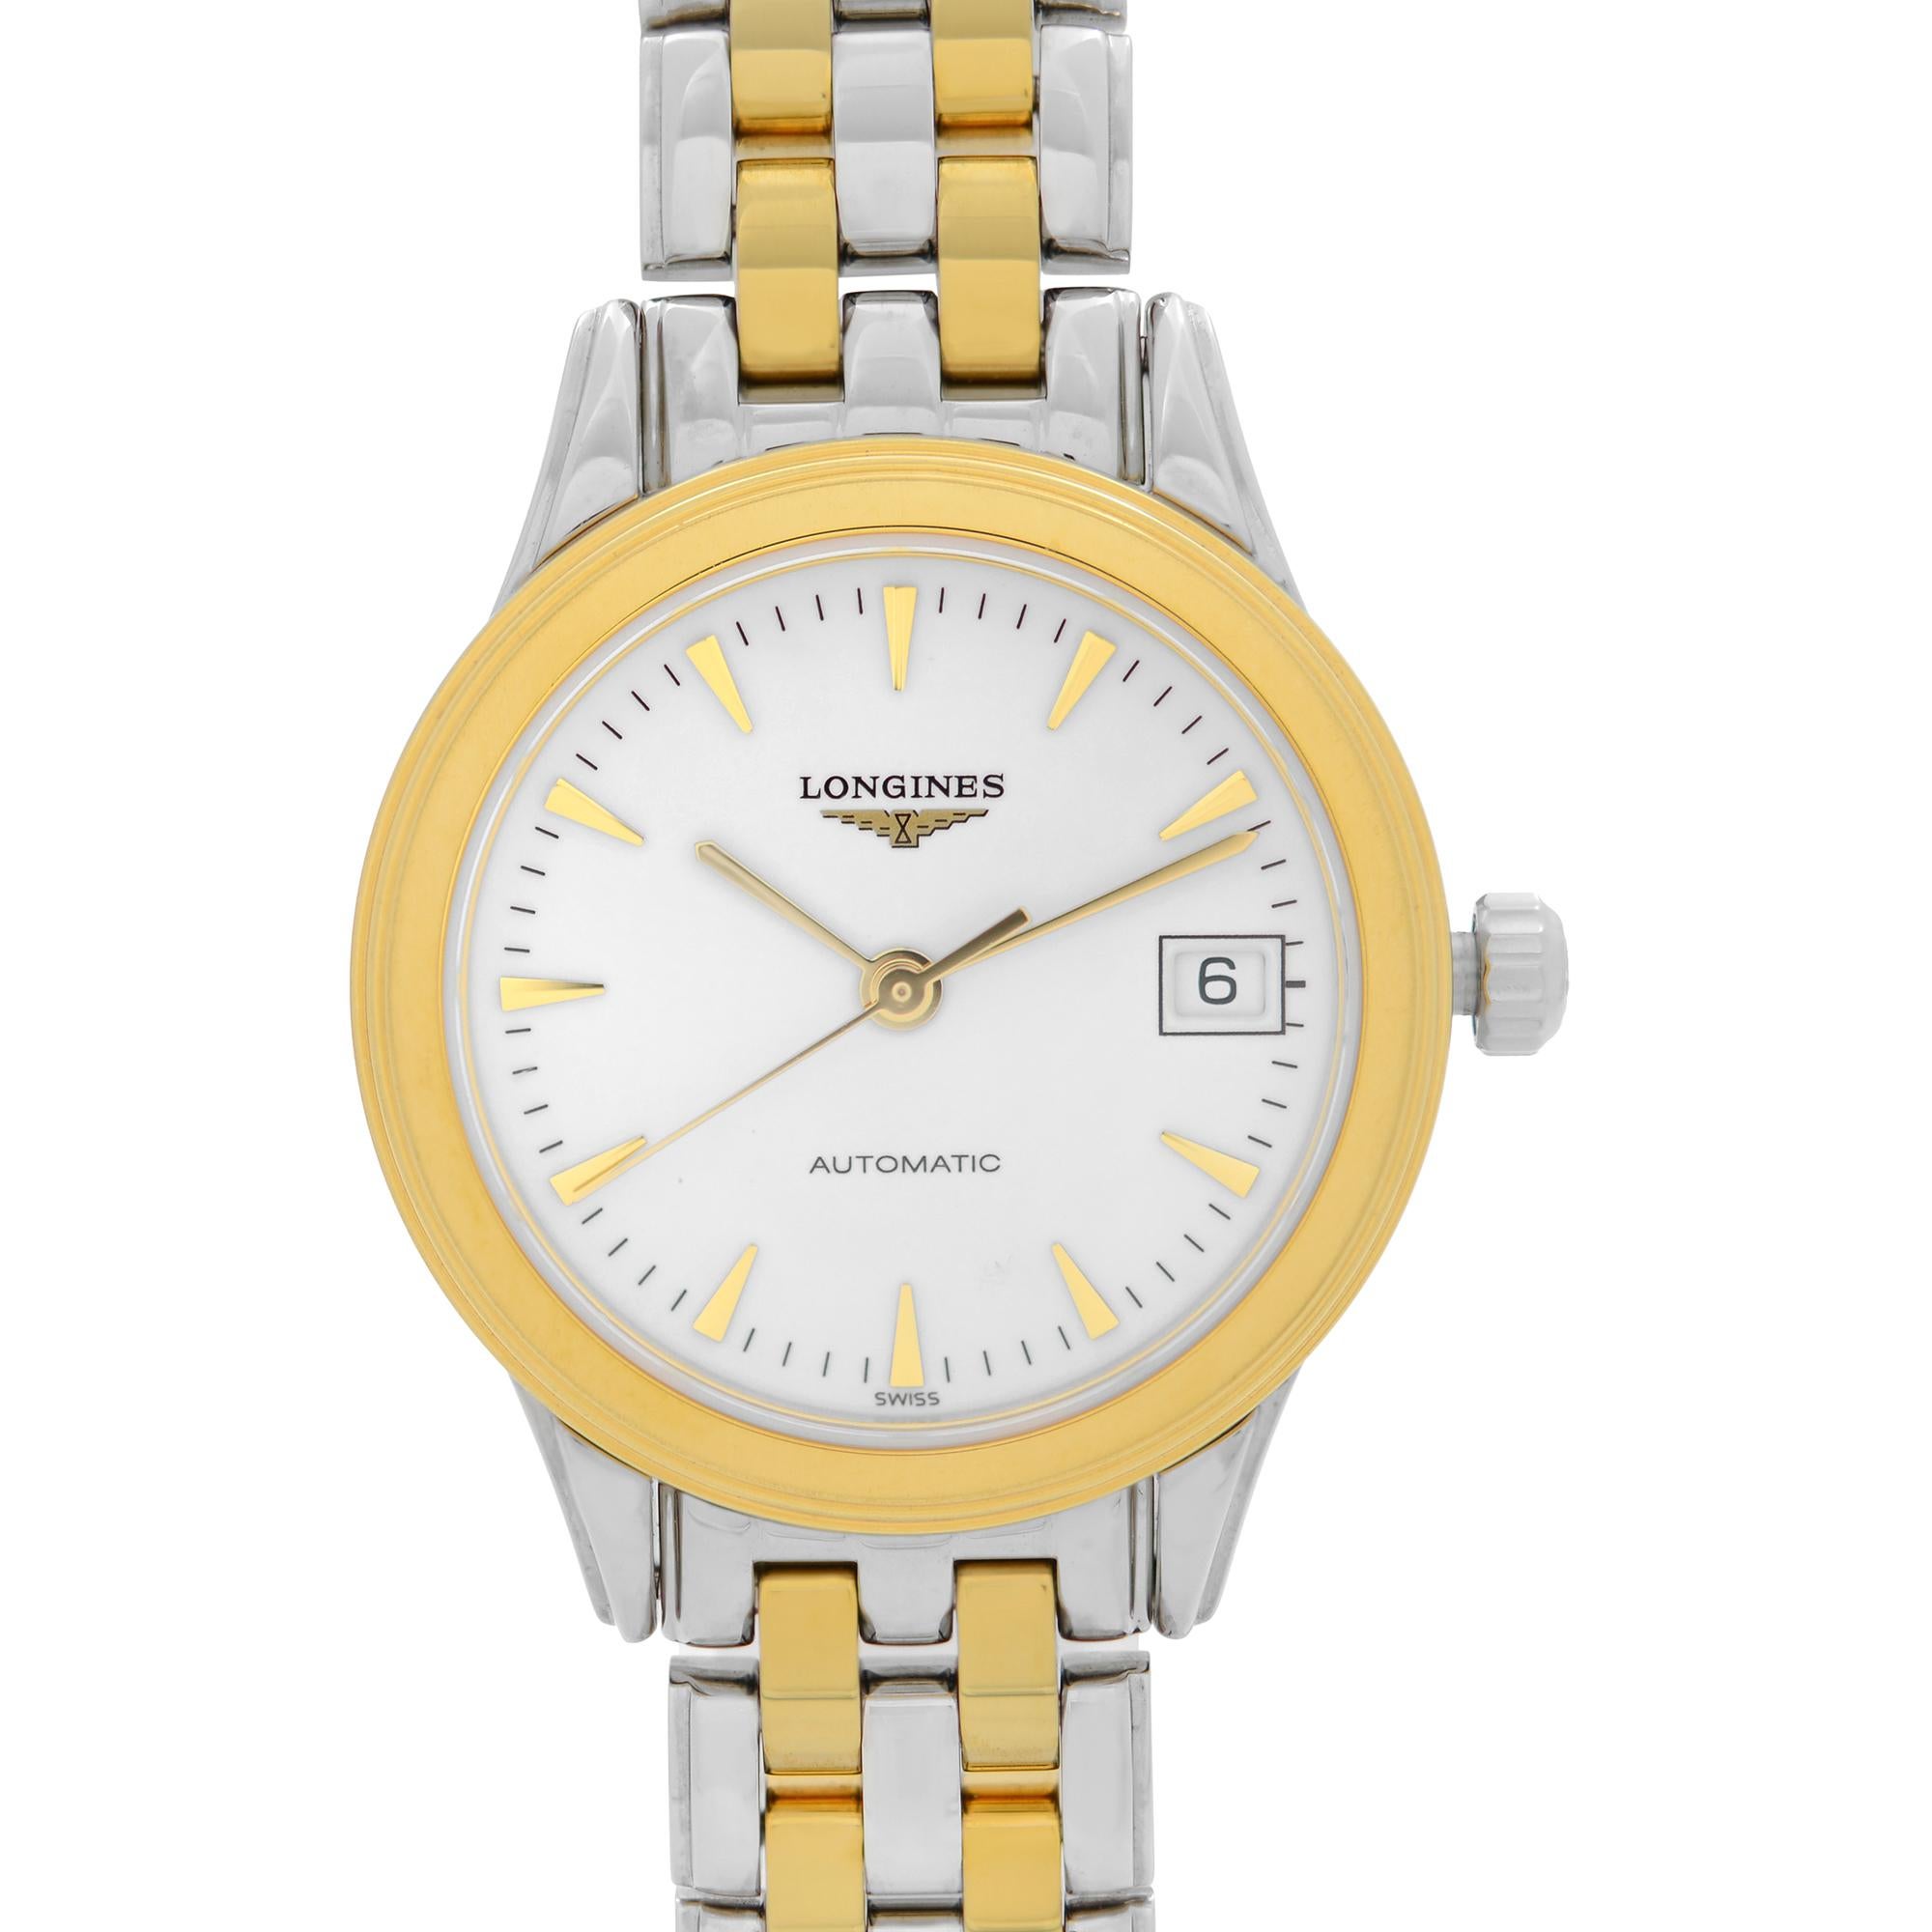 Display Model Longines Flagship L4.274.3.22.7. This Beautiful Timepiece Features: Stainless Steel Case with a Two-Tone Stainless Steel Bracelet. Fixed Yellow Gold-Plated Bezel. White Dial with Gold-Tone Hands & Index Hour Markers. Minute Markers